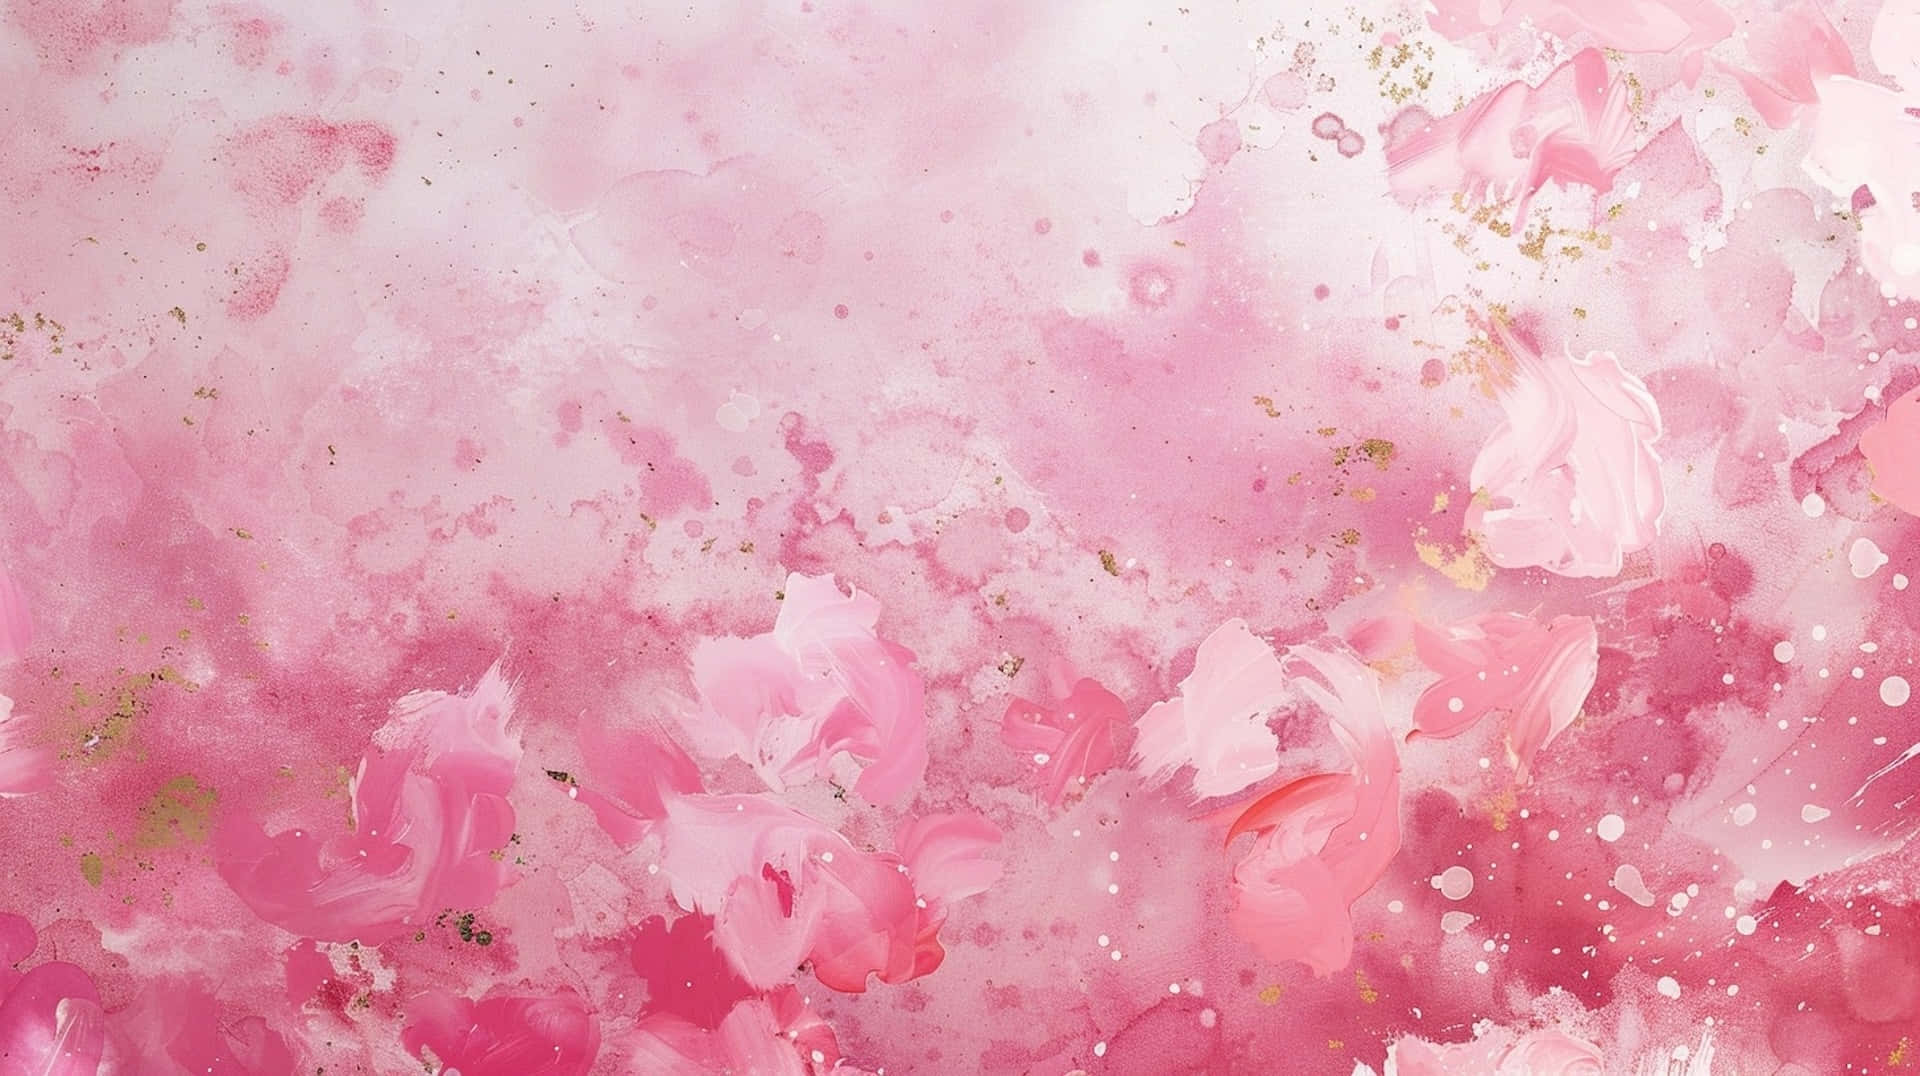 Pink Floral Watercolor Background Wallpaper